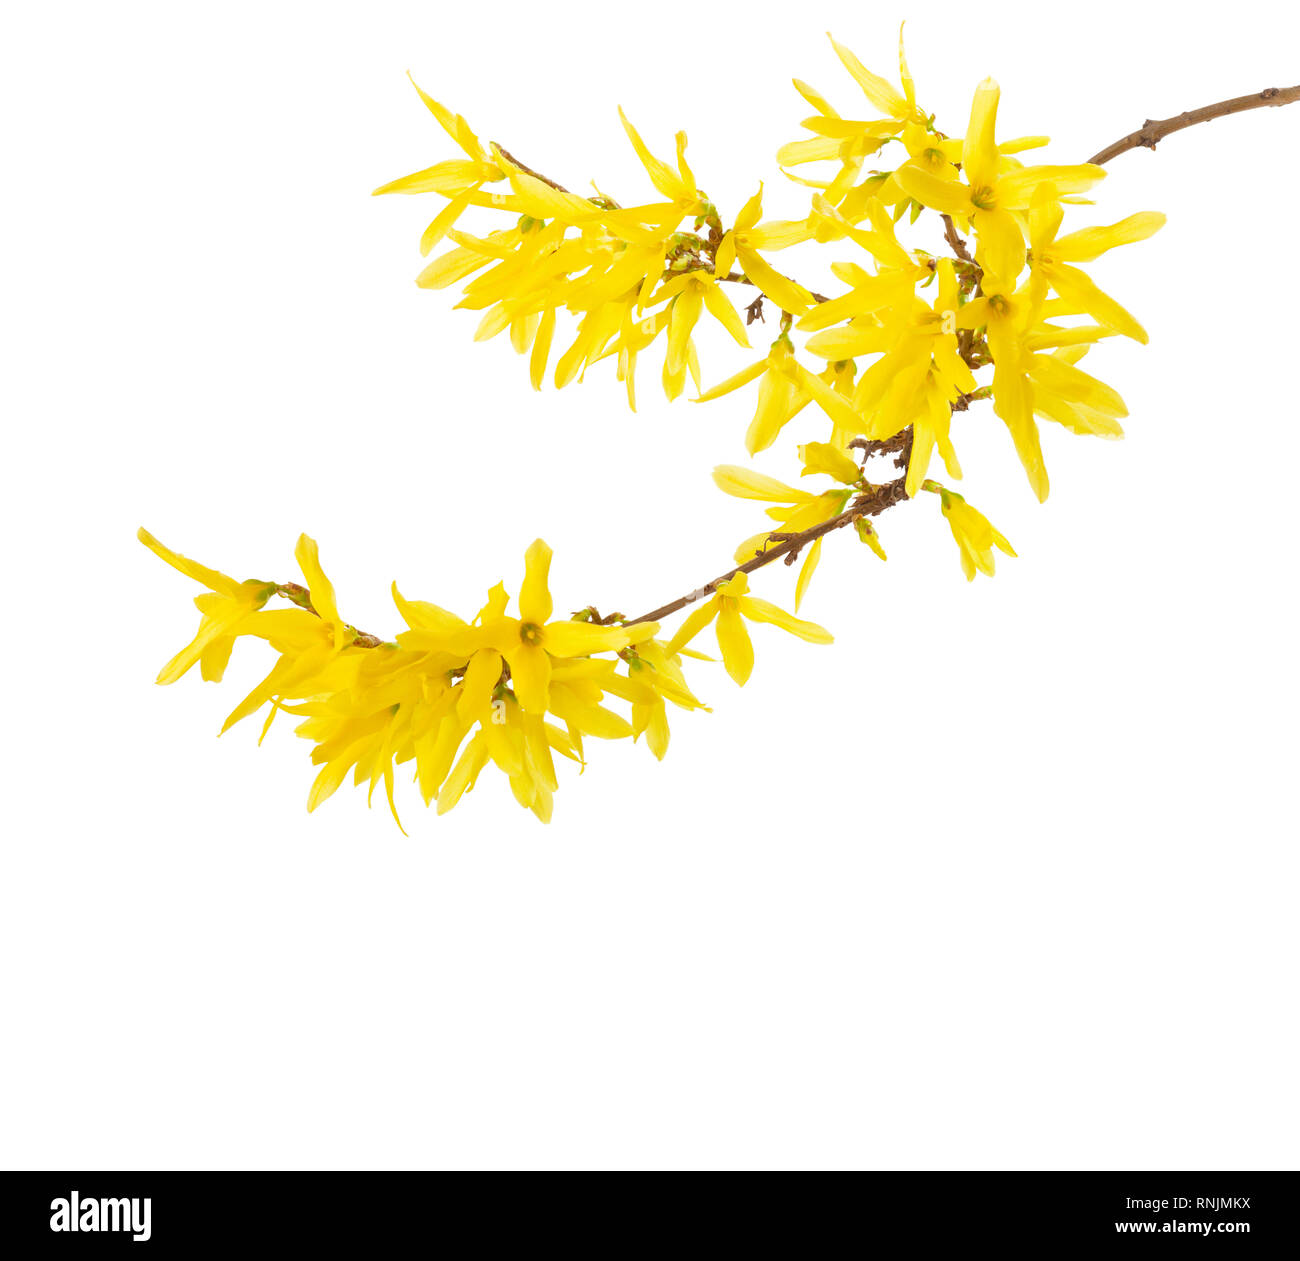 Branch with yellow flowers of Forsythia isolated on white background. Stock Photo